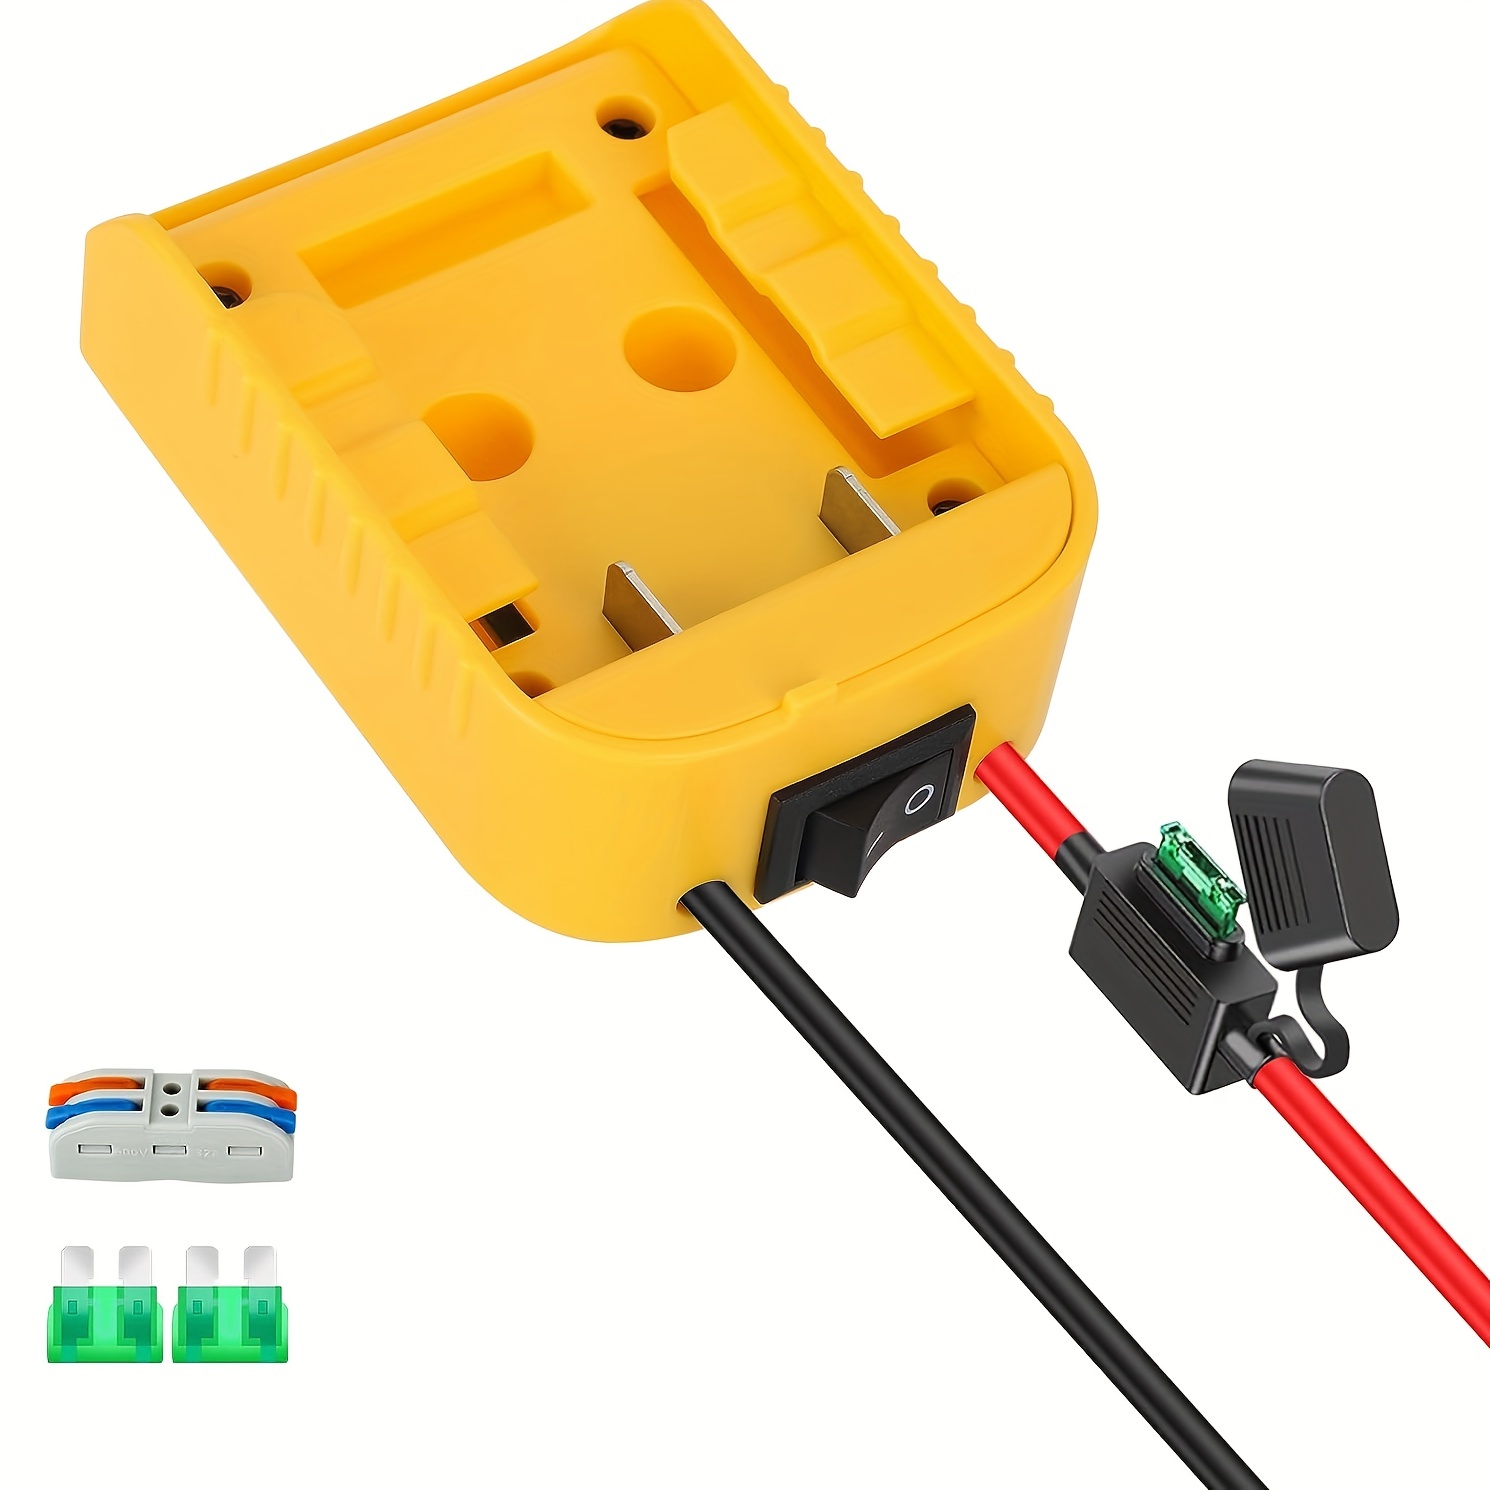 Power Wheels Adapter For Dewalt 20V Battery Adapter Power Wheels Battery  Conversion Kit With Switch, Fuse & Wire Terminals, 12AWG Wire, Power  Connecto